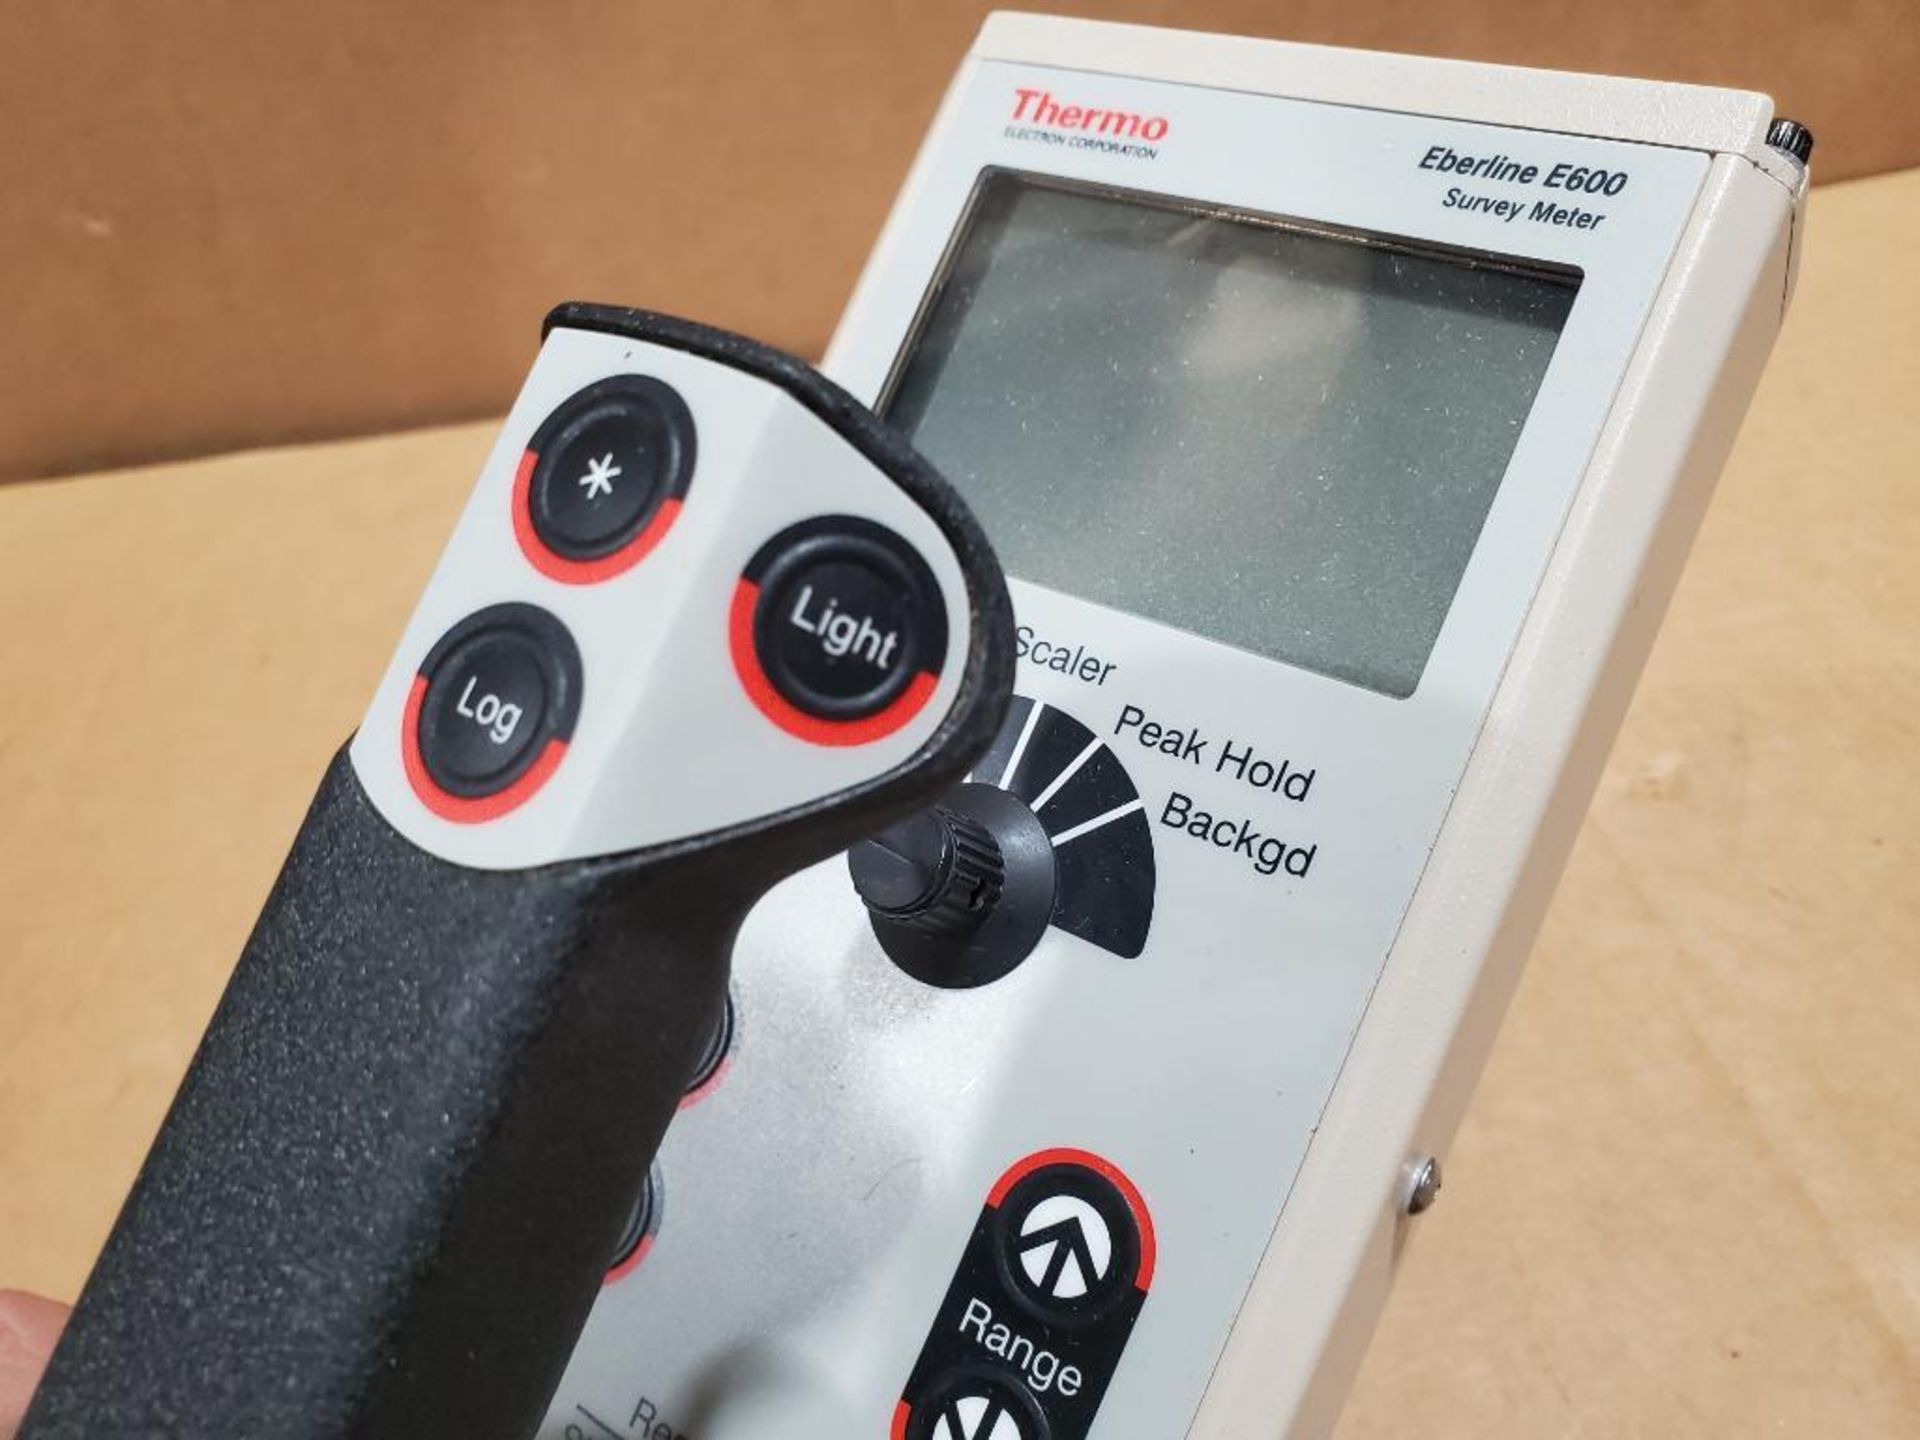 Thermo Electron Corporation geiger counter survey meter. Model Eberline E600. - Image 4 of 10